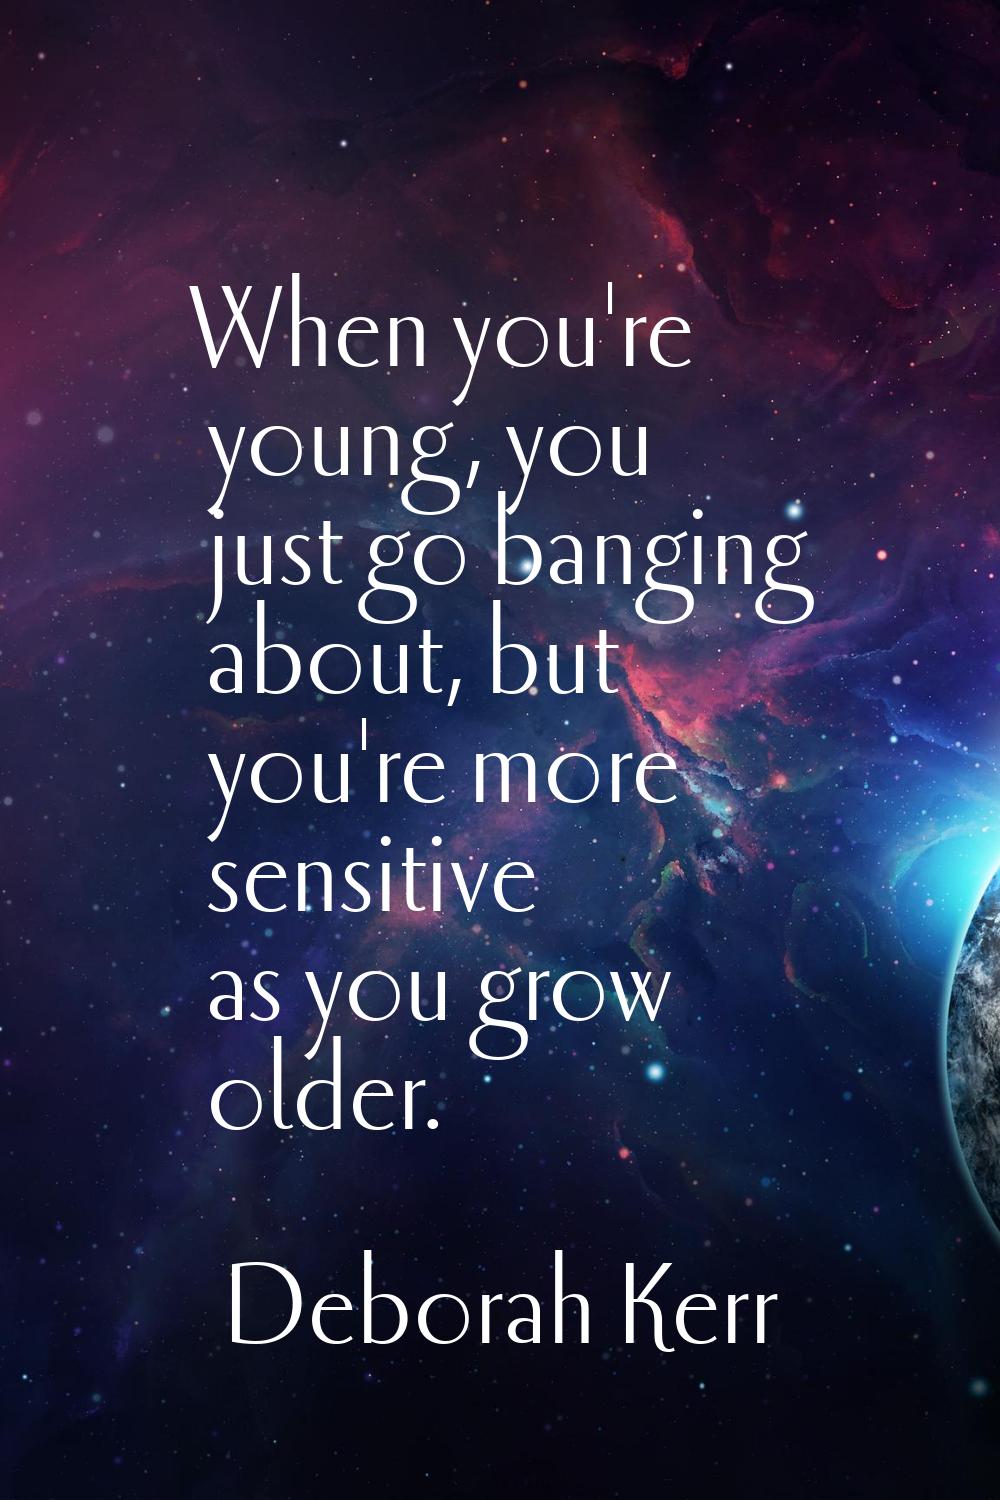 When you're young, you just go banging about, but you're more sensitive as you grow older.